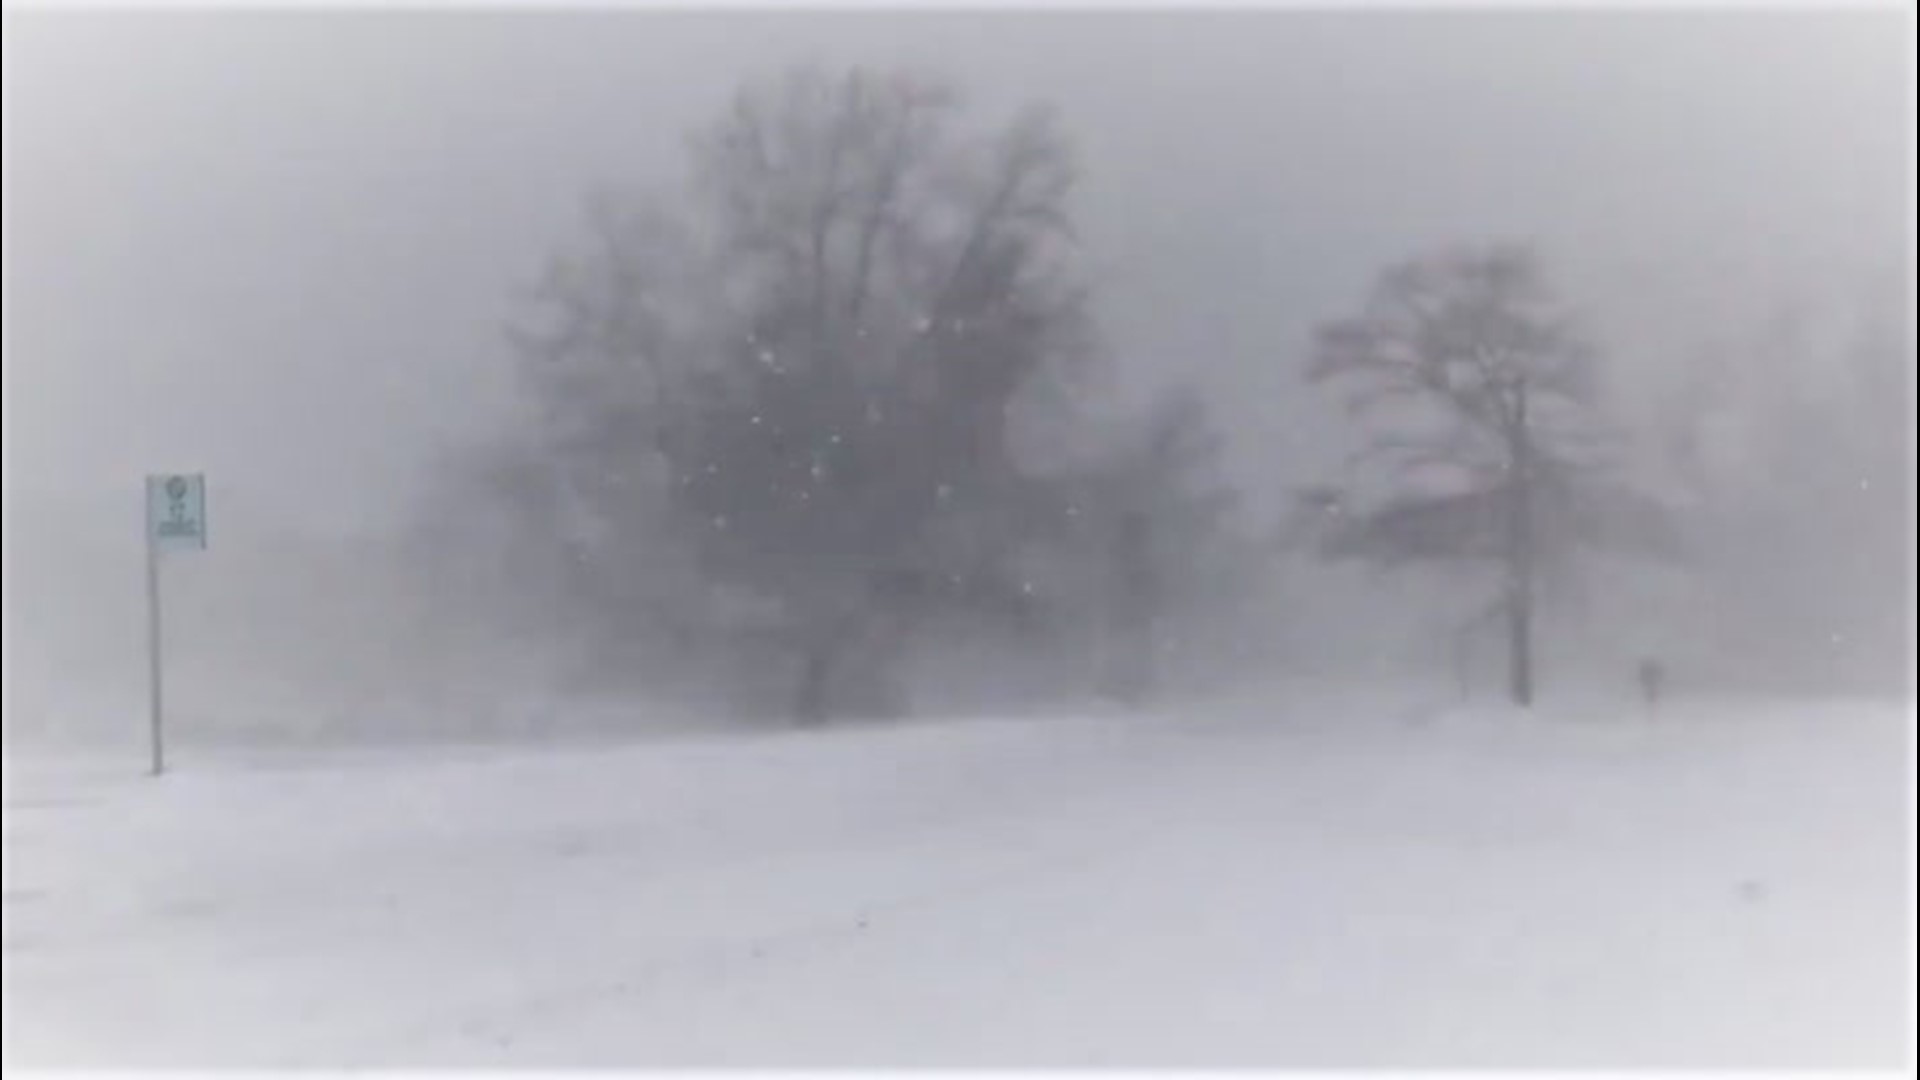 A lake-effect snowstorm hit Oswego, New York, on Feb. 27, dropping several inches of snow that created blizzard conditions as winds gusted between 45 and 50 mph.